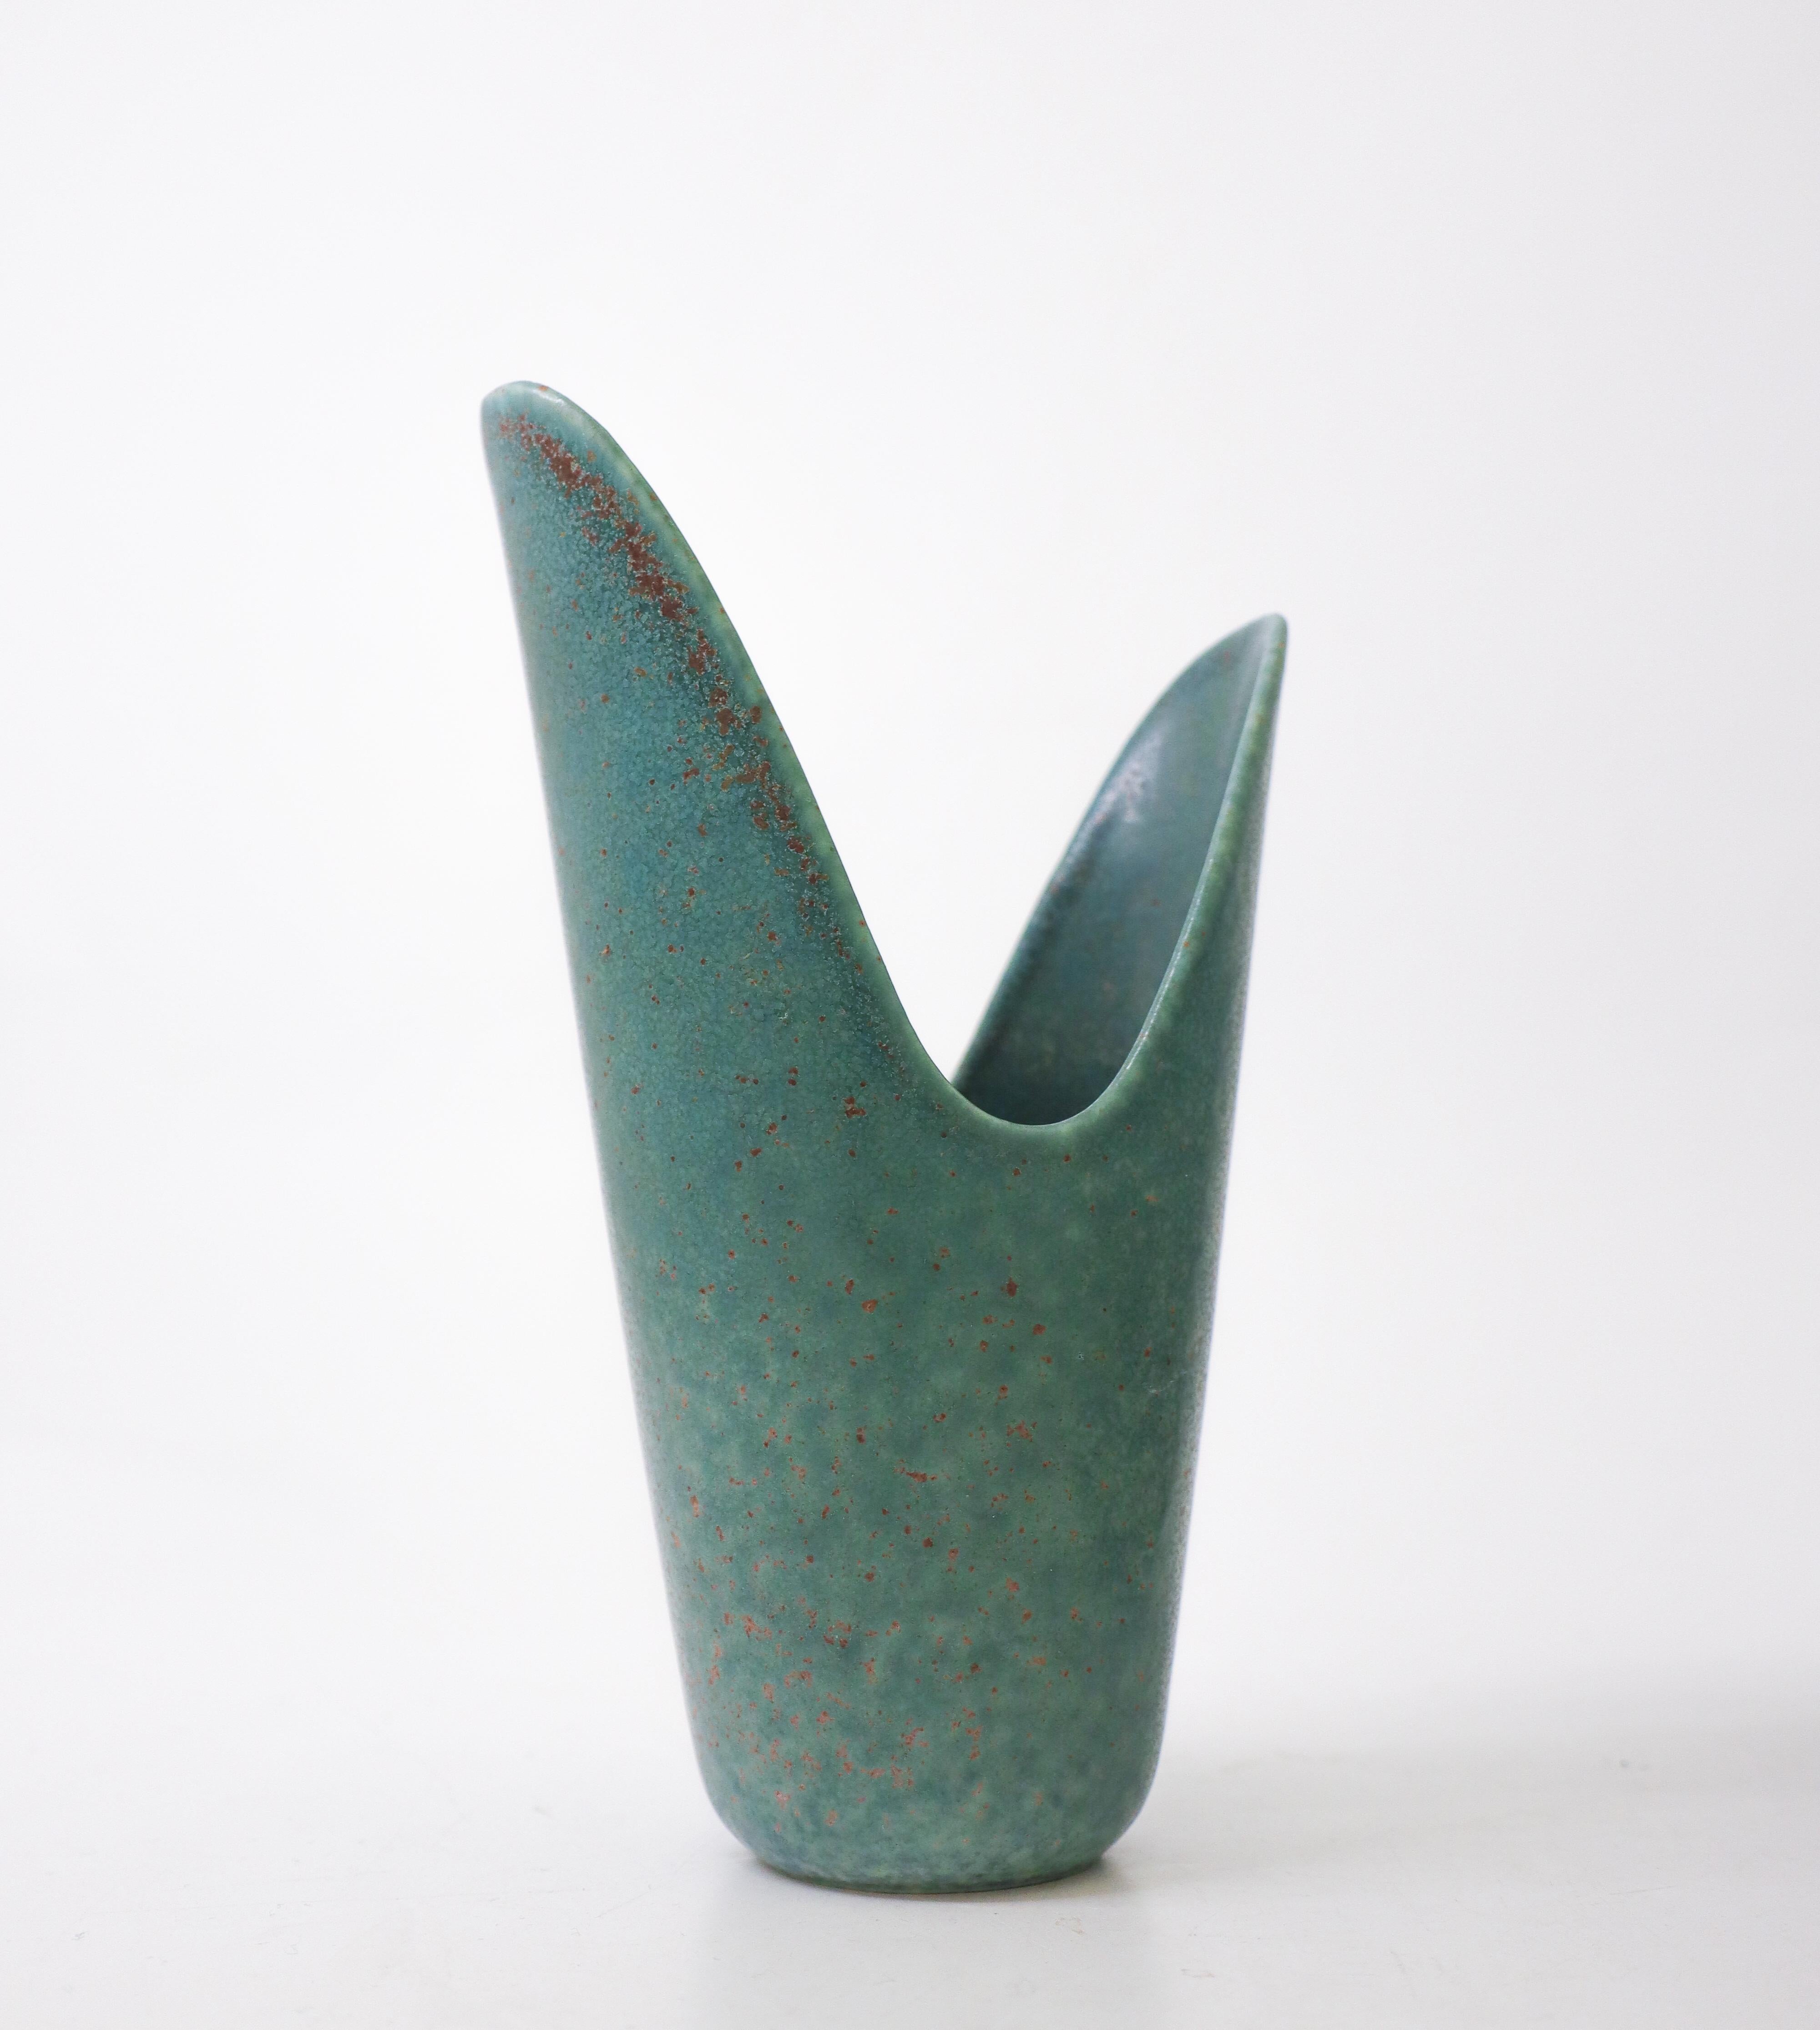 A ceramic vase with a lovely green speckled glaze designed by Gunnar Nylund at Rörstrand, the vase is 18,5 cm (7,4